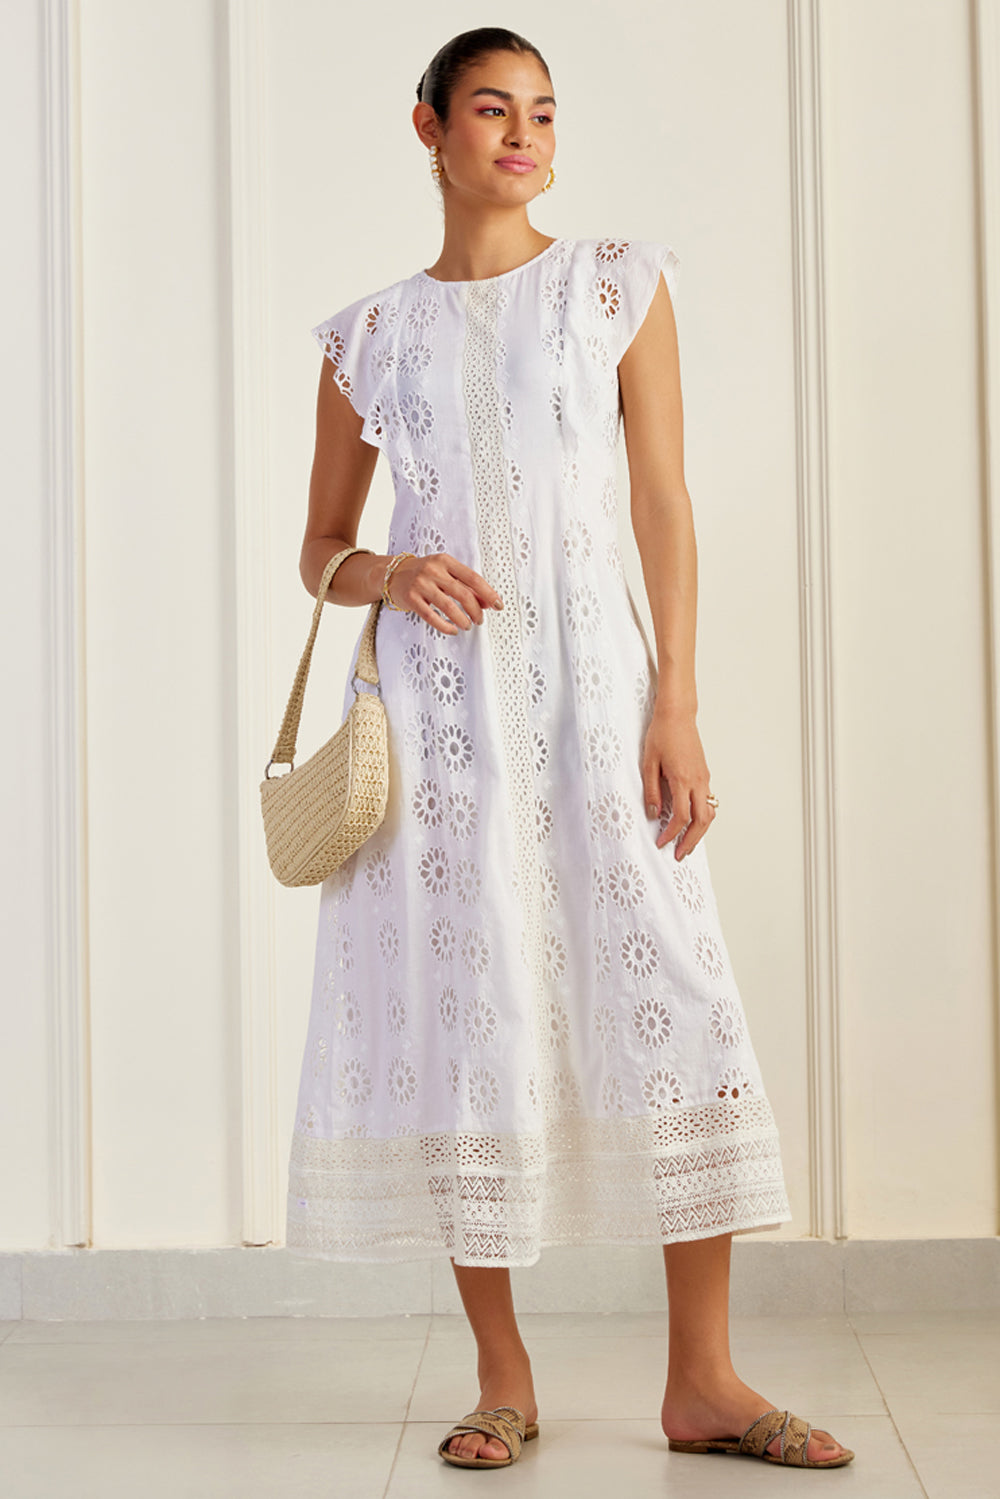 Udaipur White Broderie Anglaise Dress